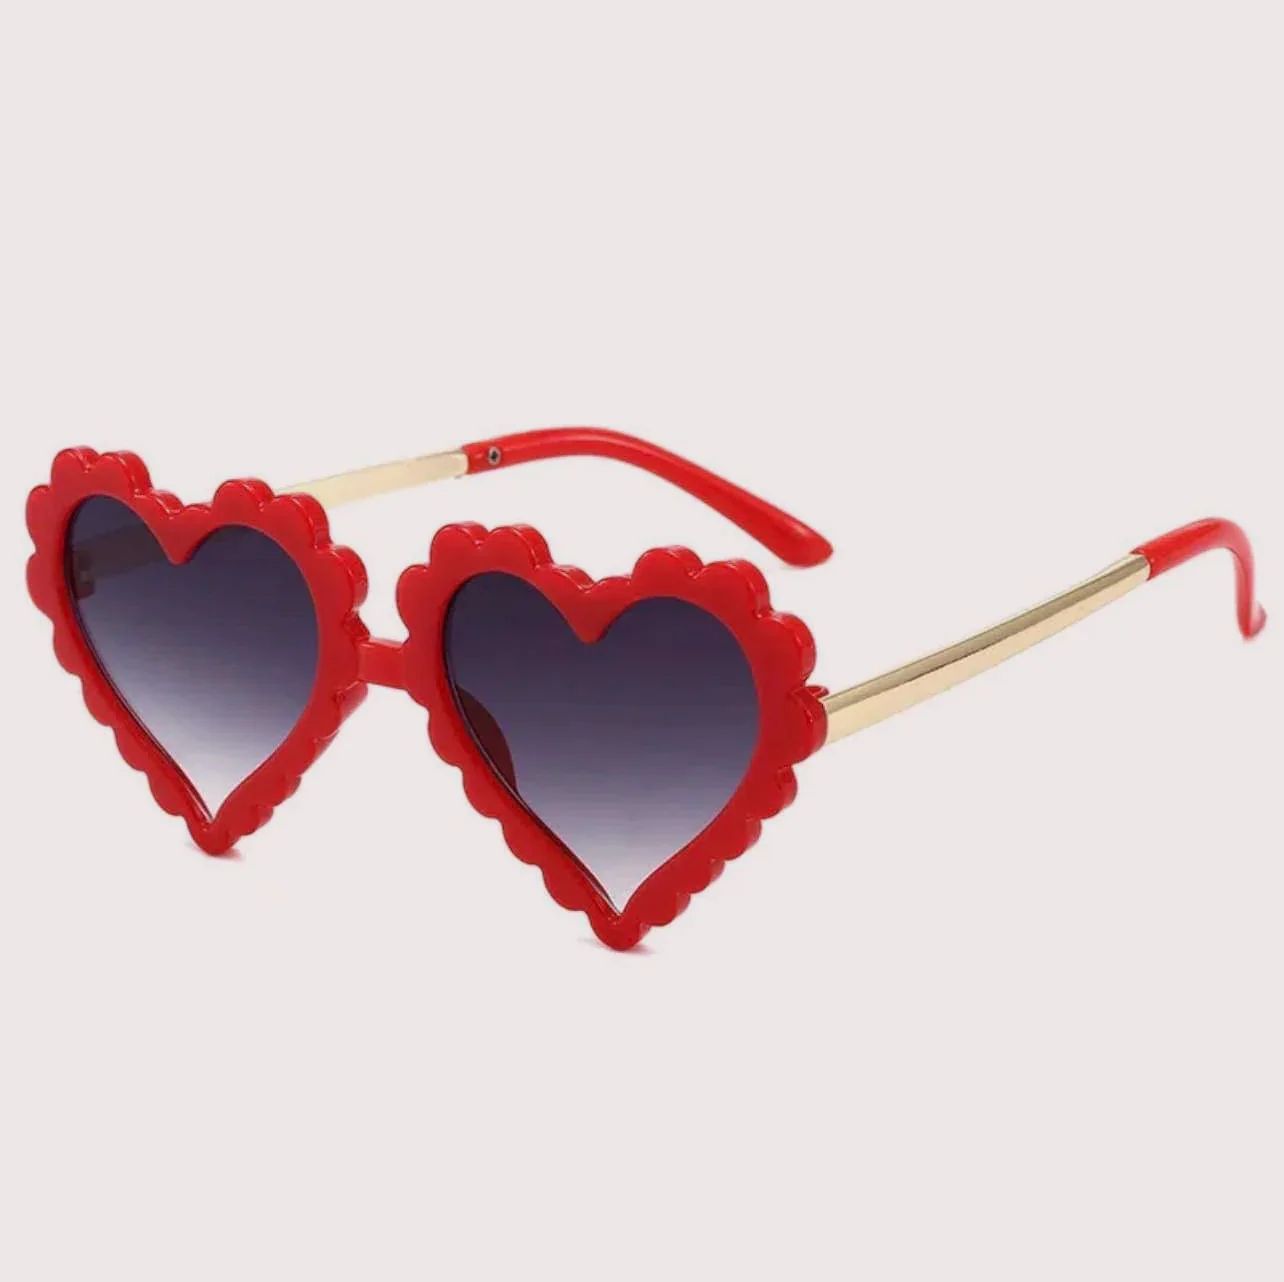 Heart Sunglasses - 4 colors available | Love and Grow Clothing Co